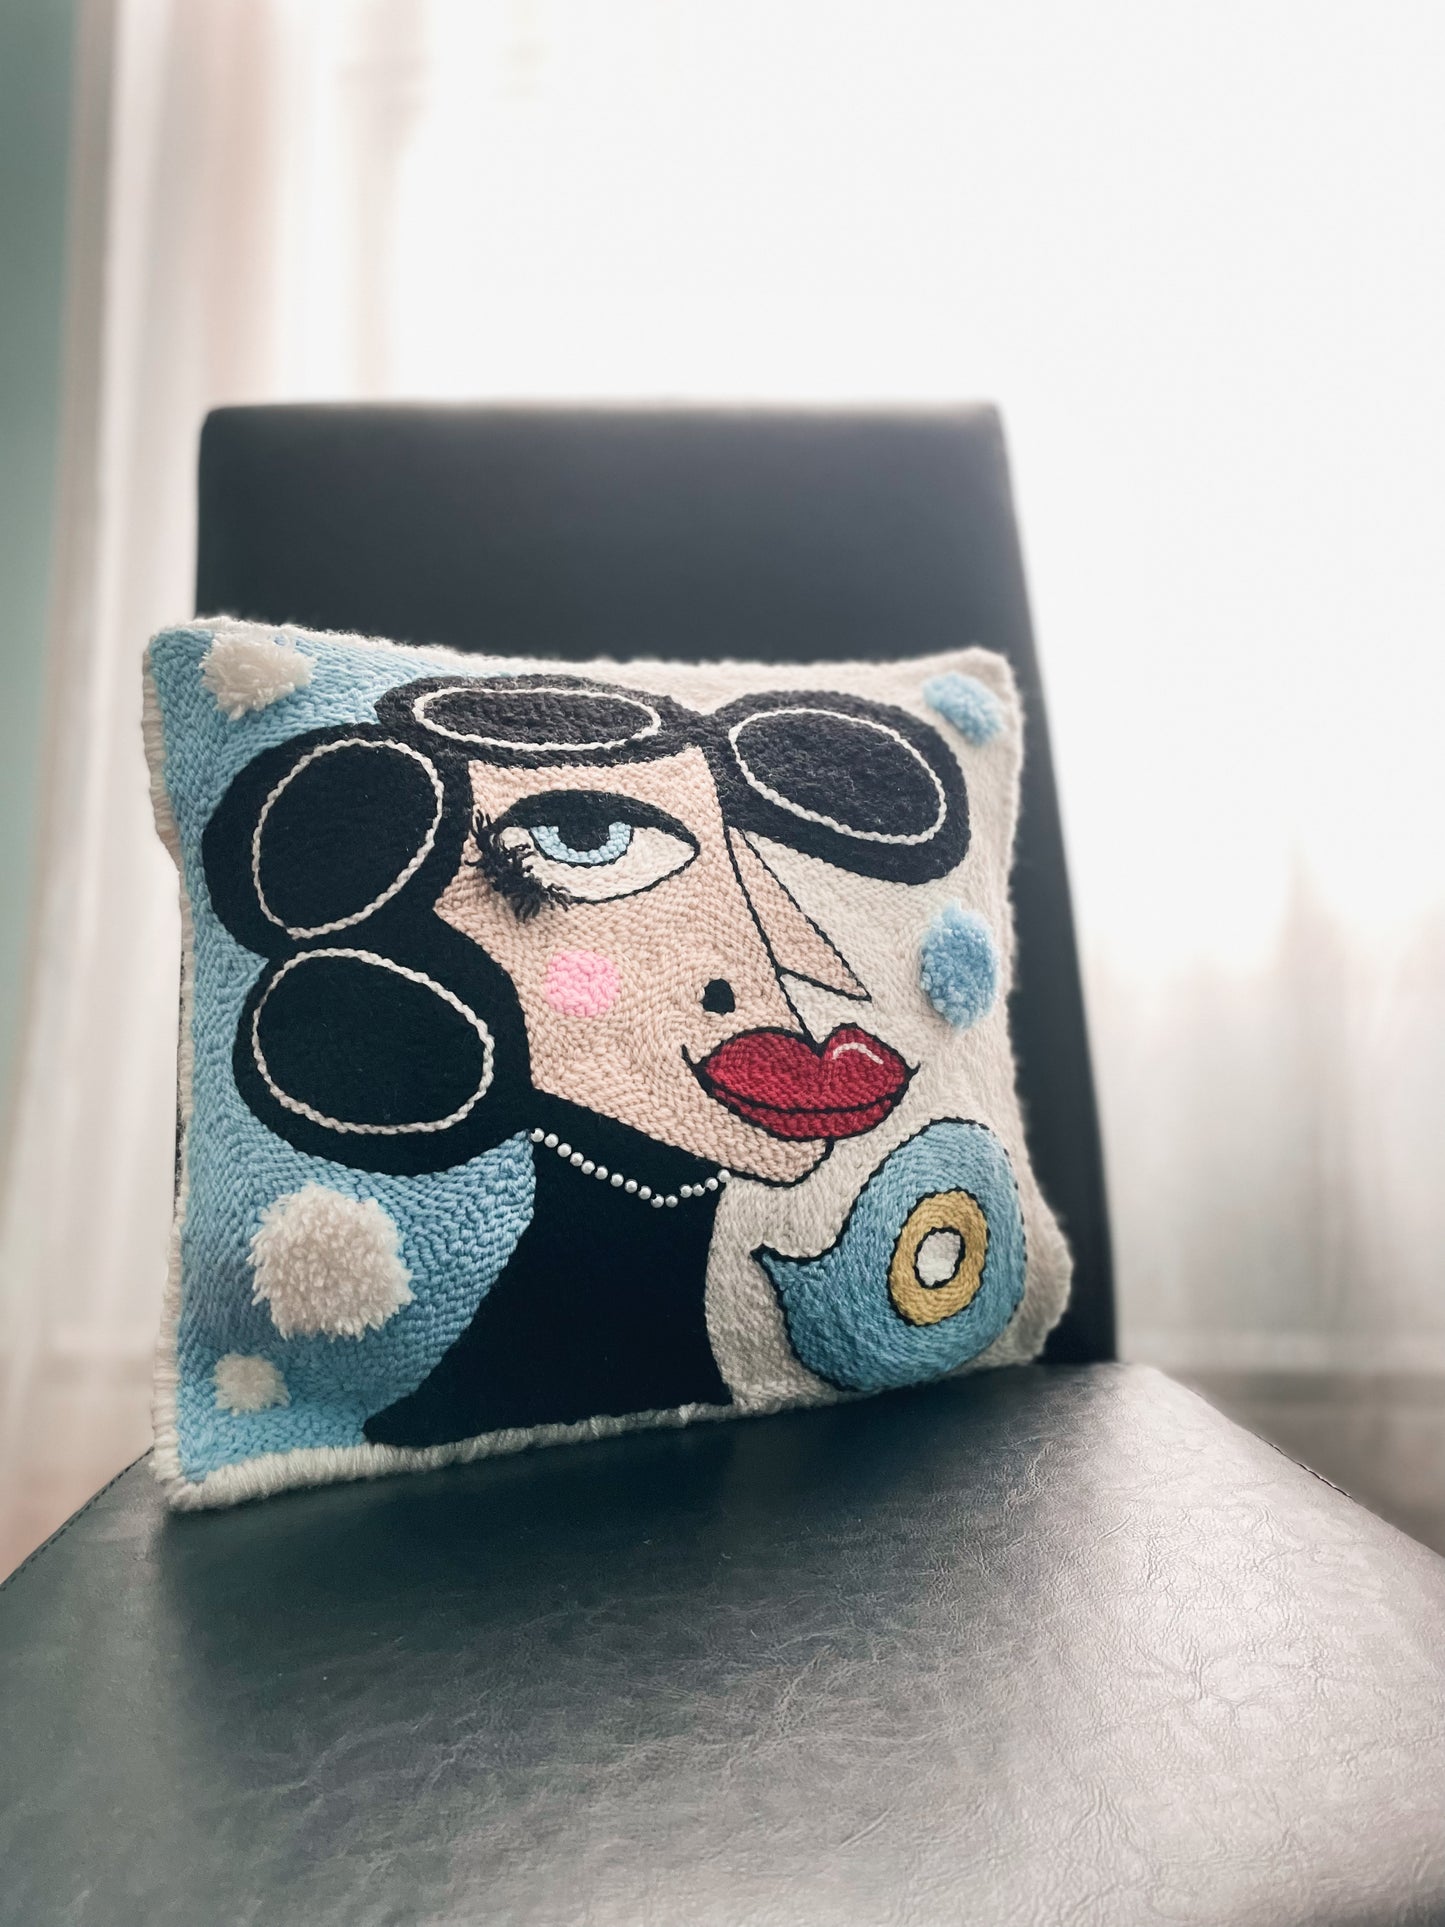 Miss Marilyn - Decorative Cushion - Punch needle - Abstract Art